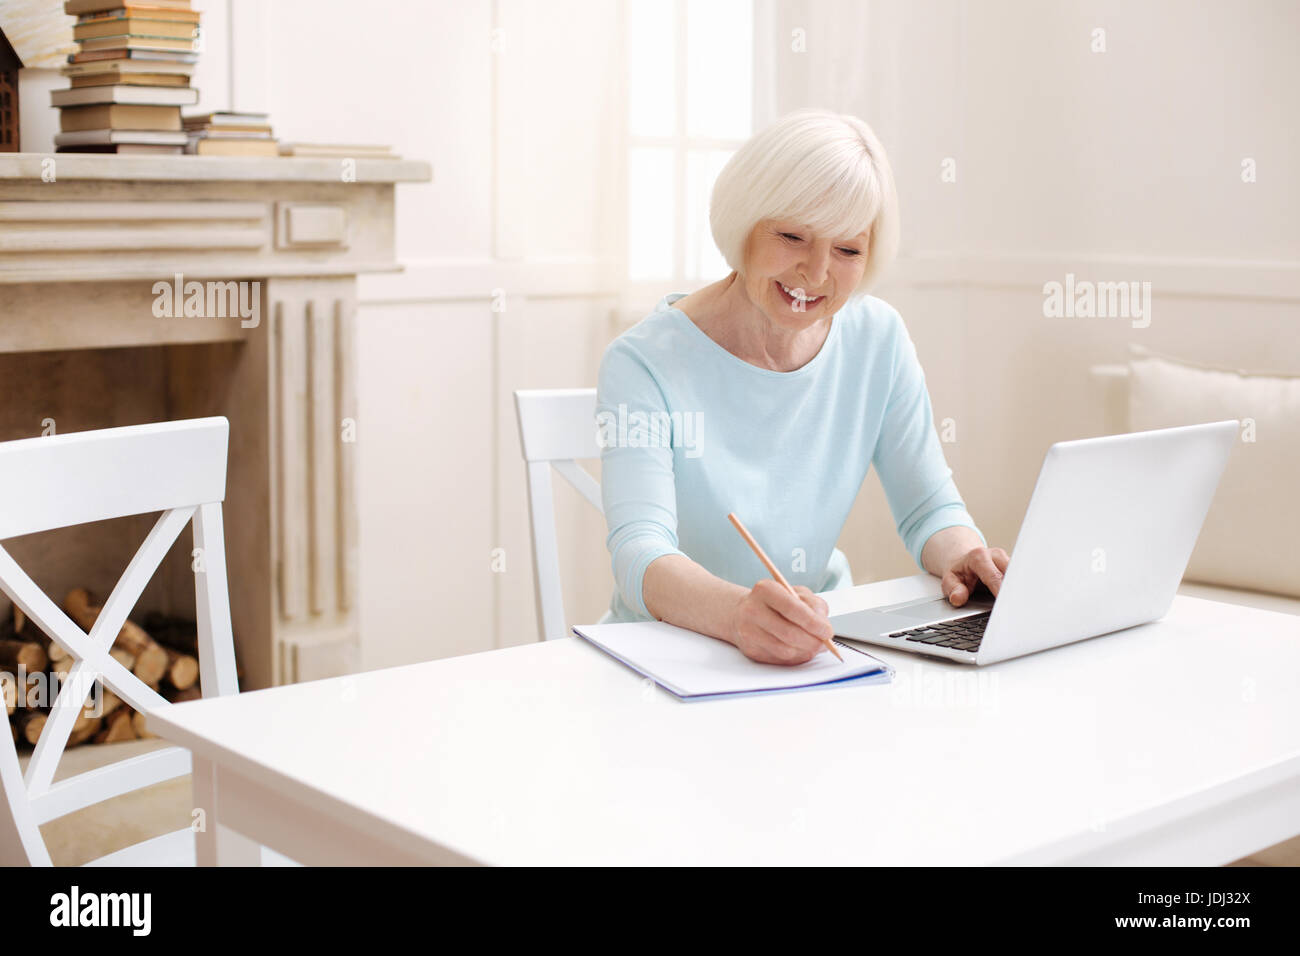 Lively bright lady writing down some tips Stock Photo